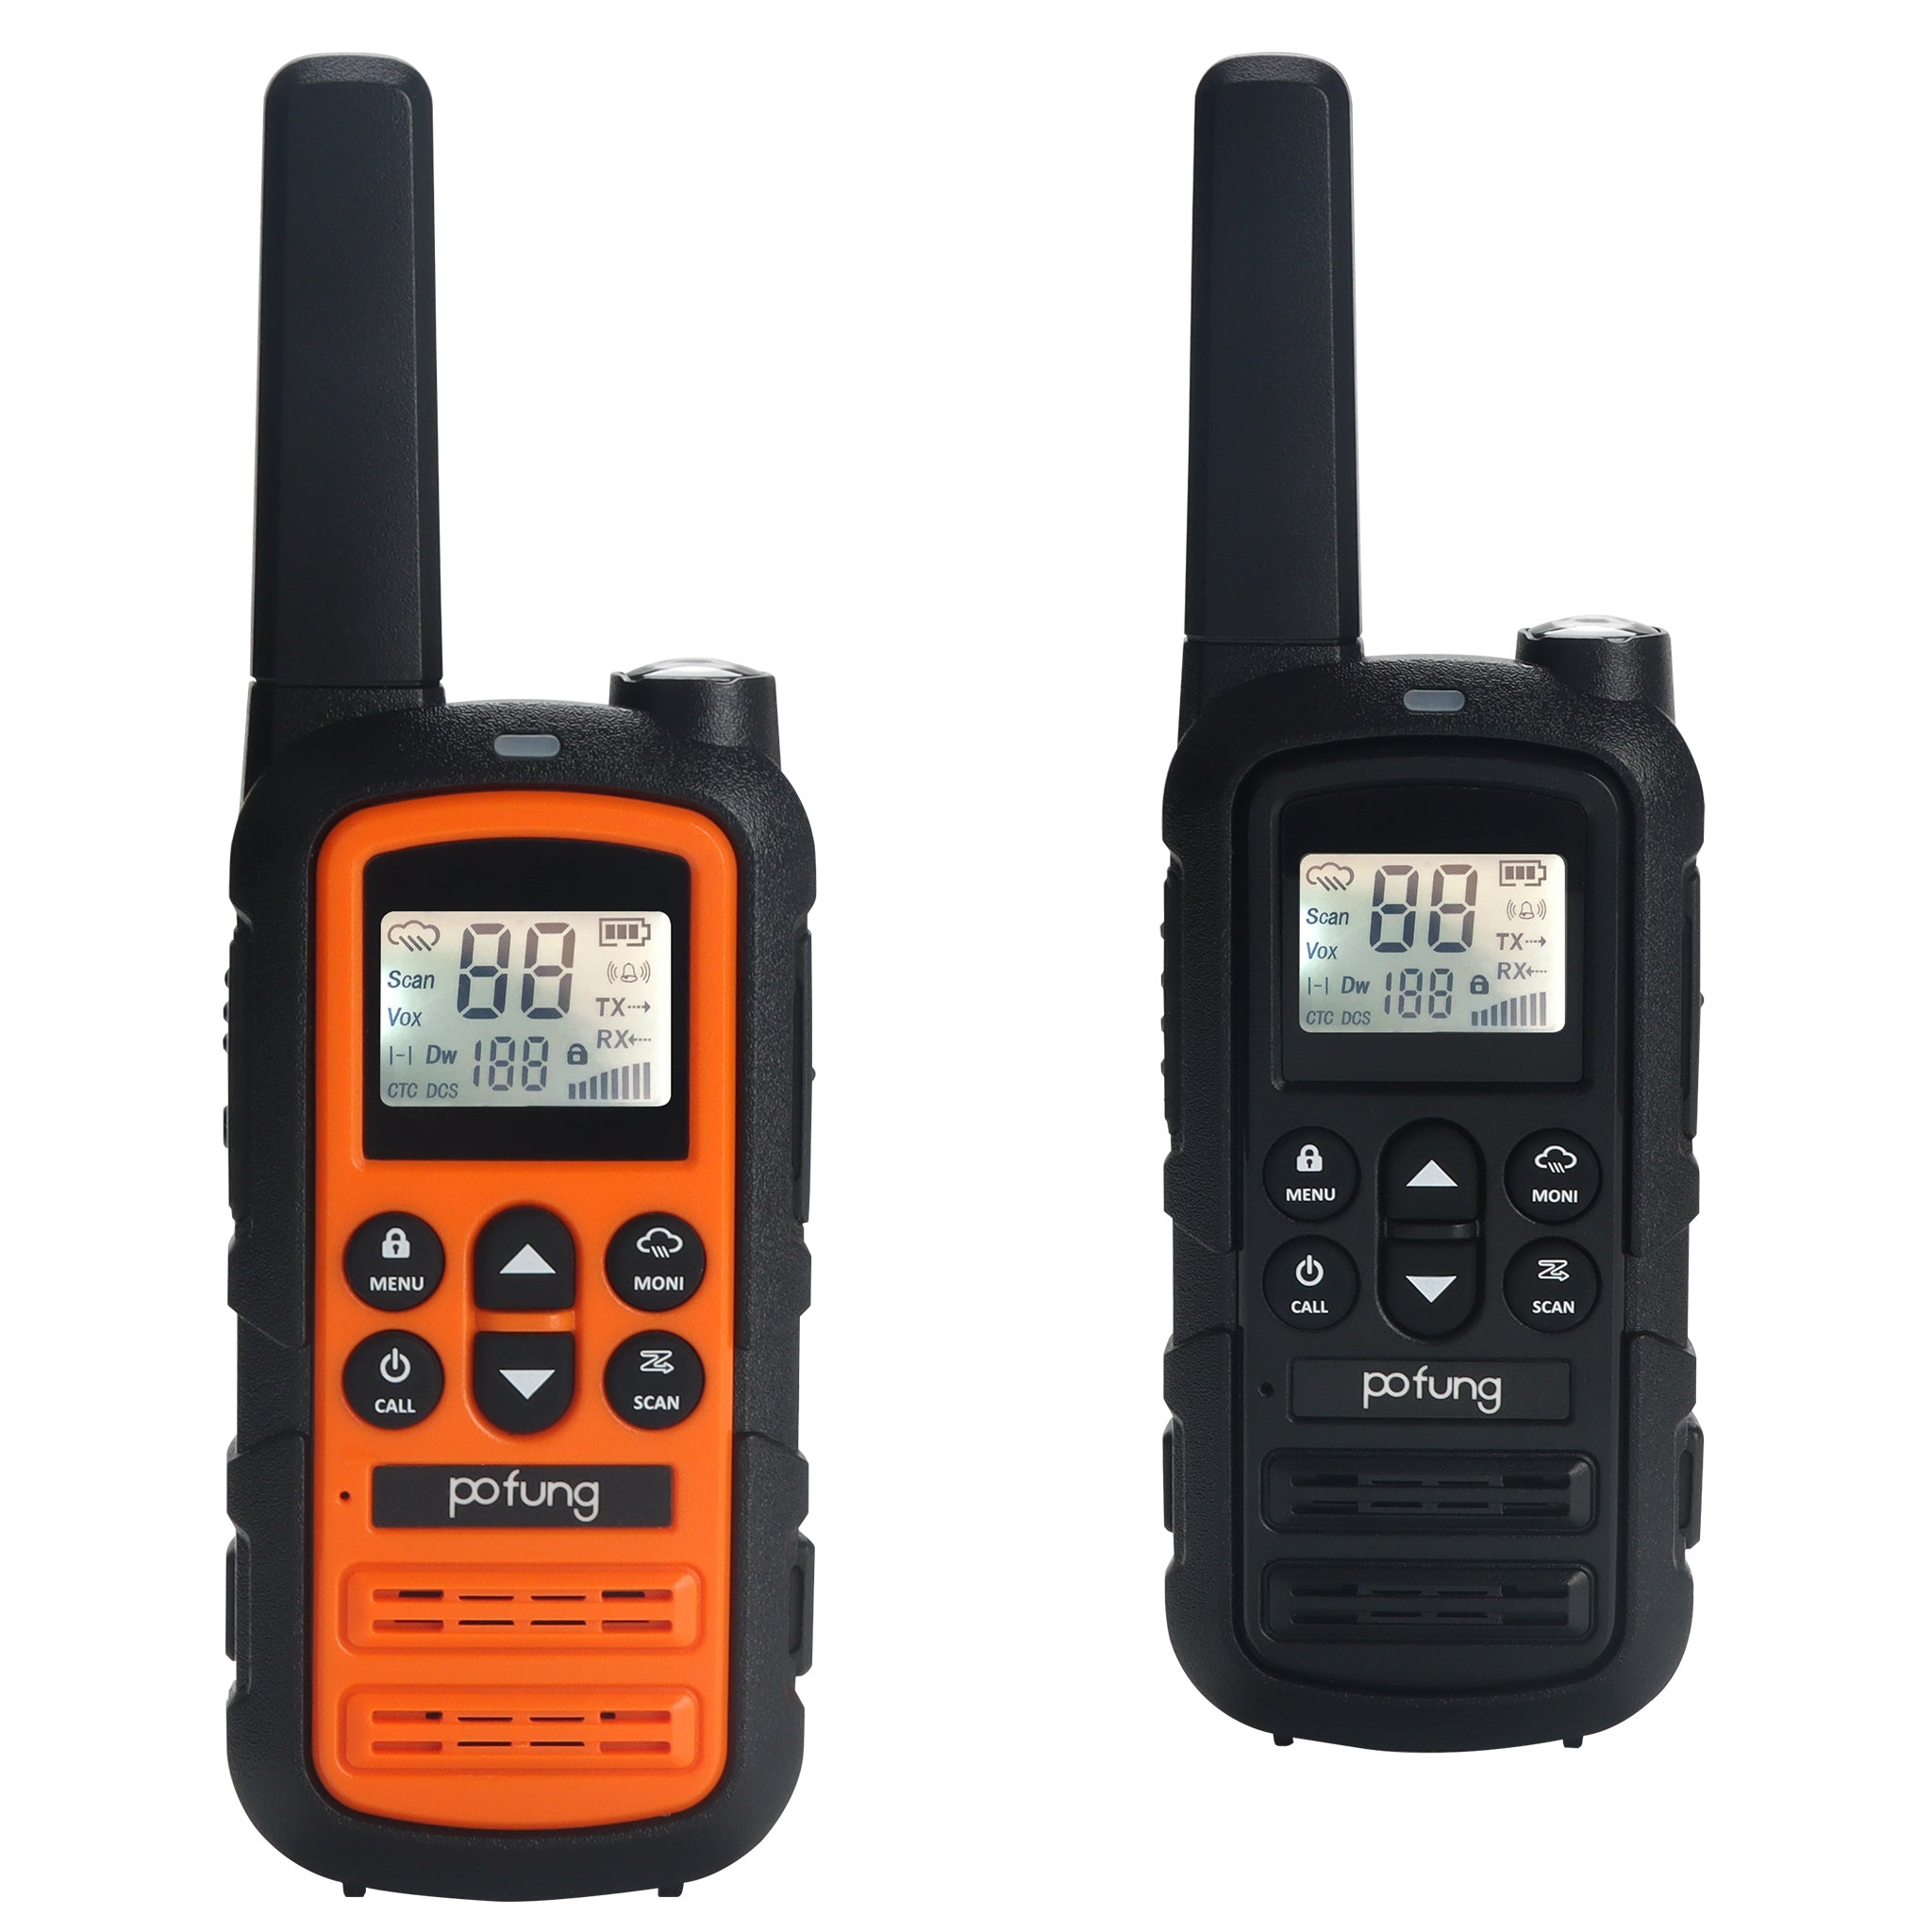 YDC Tech Pofung CT23-GF1 Walkie Talkie FRS Handheld Rechargeable 2 Way Radio 22 Channel VOX Two Way Radios(2 Pack) NOAA Built-in